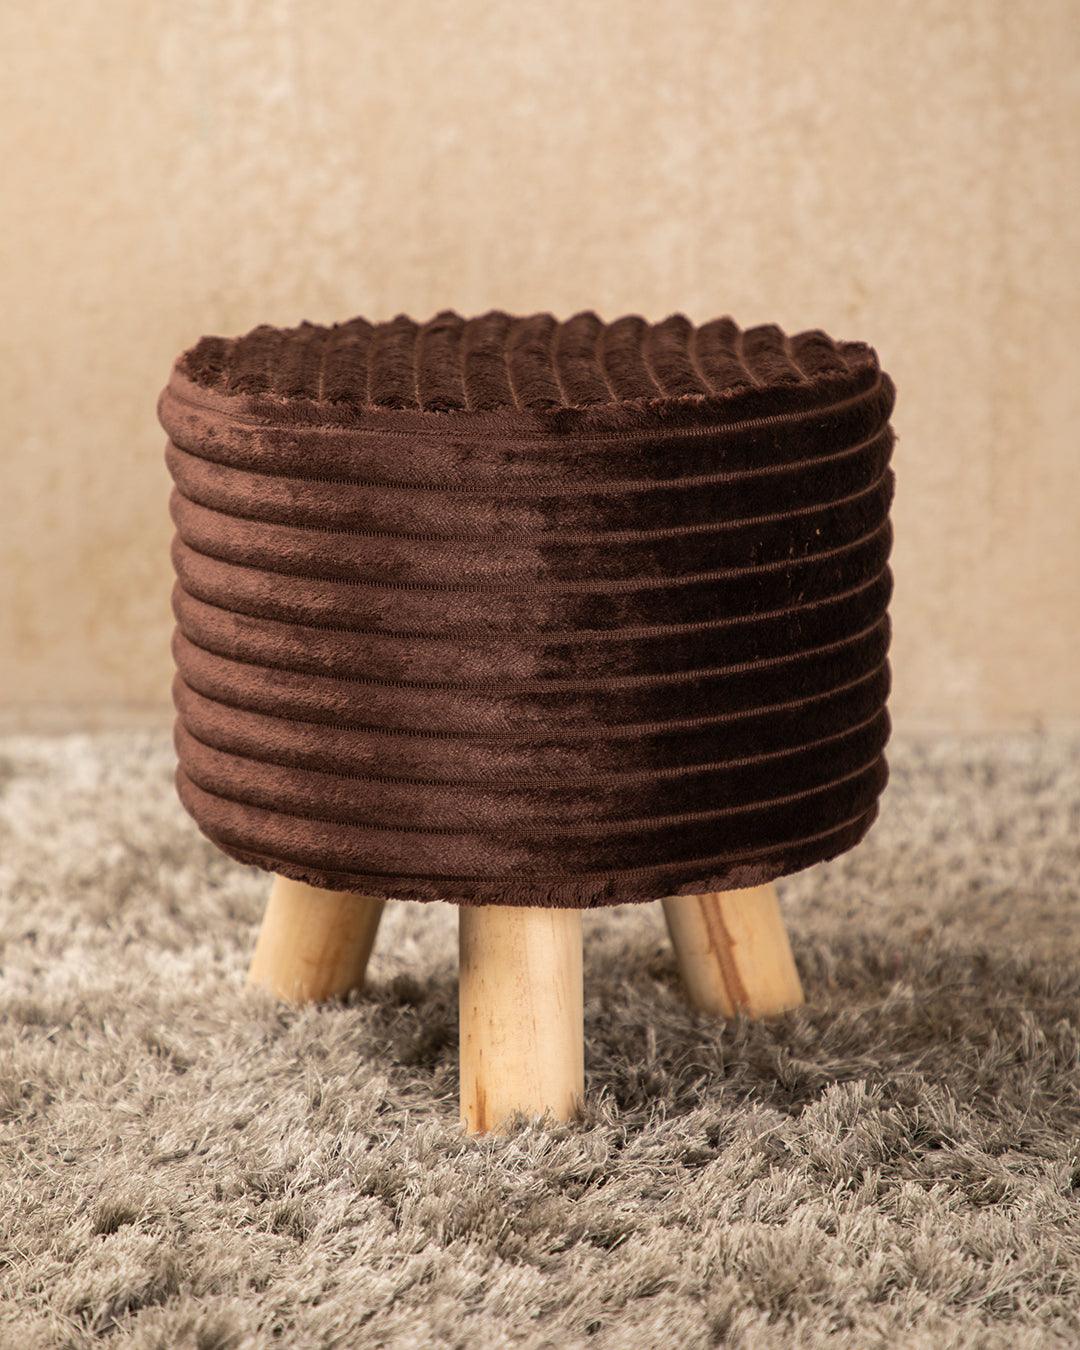 Tri Stool, Foot Stool with 3 Legs, Ottoman, Brown, Wood - MARKET 99